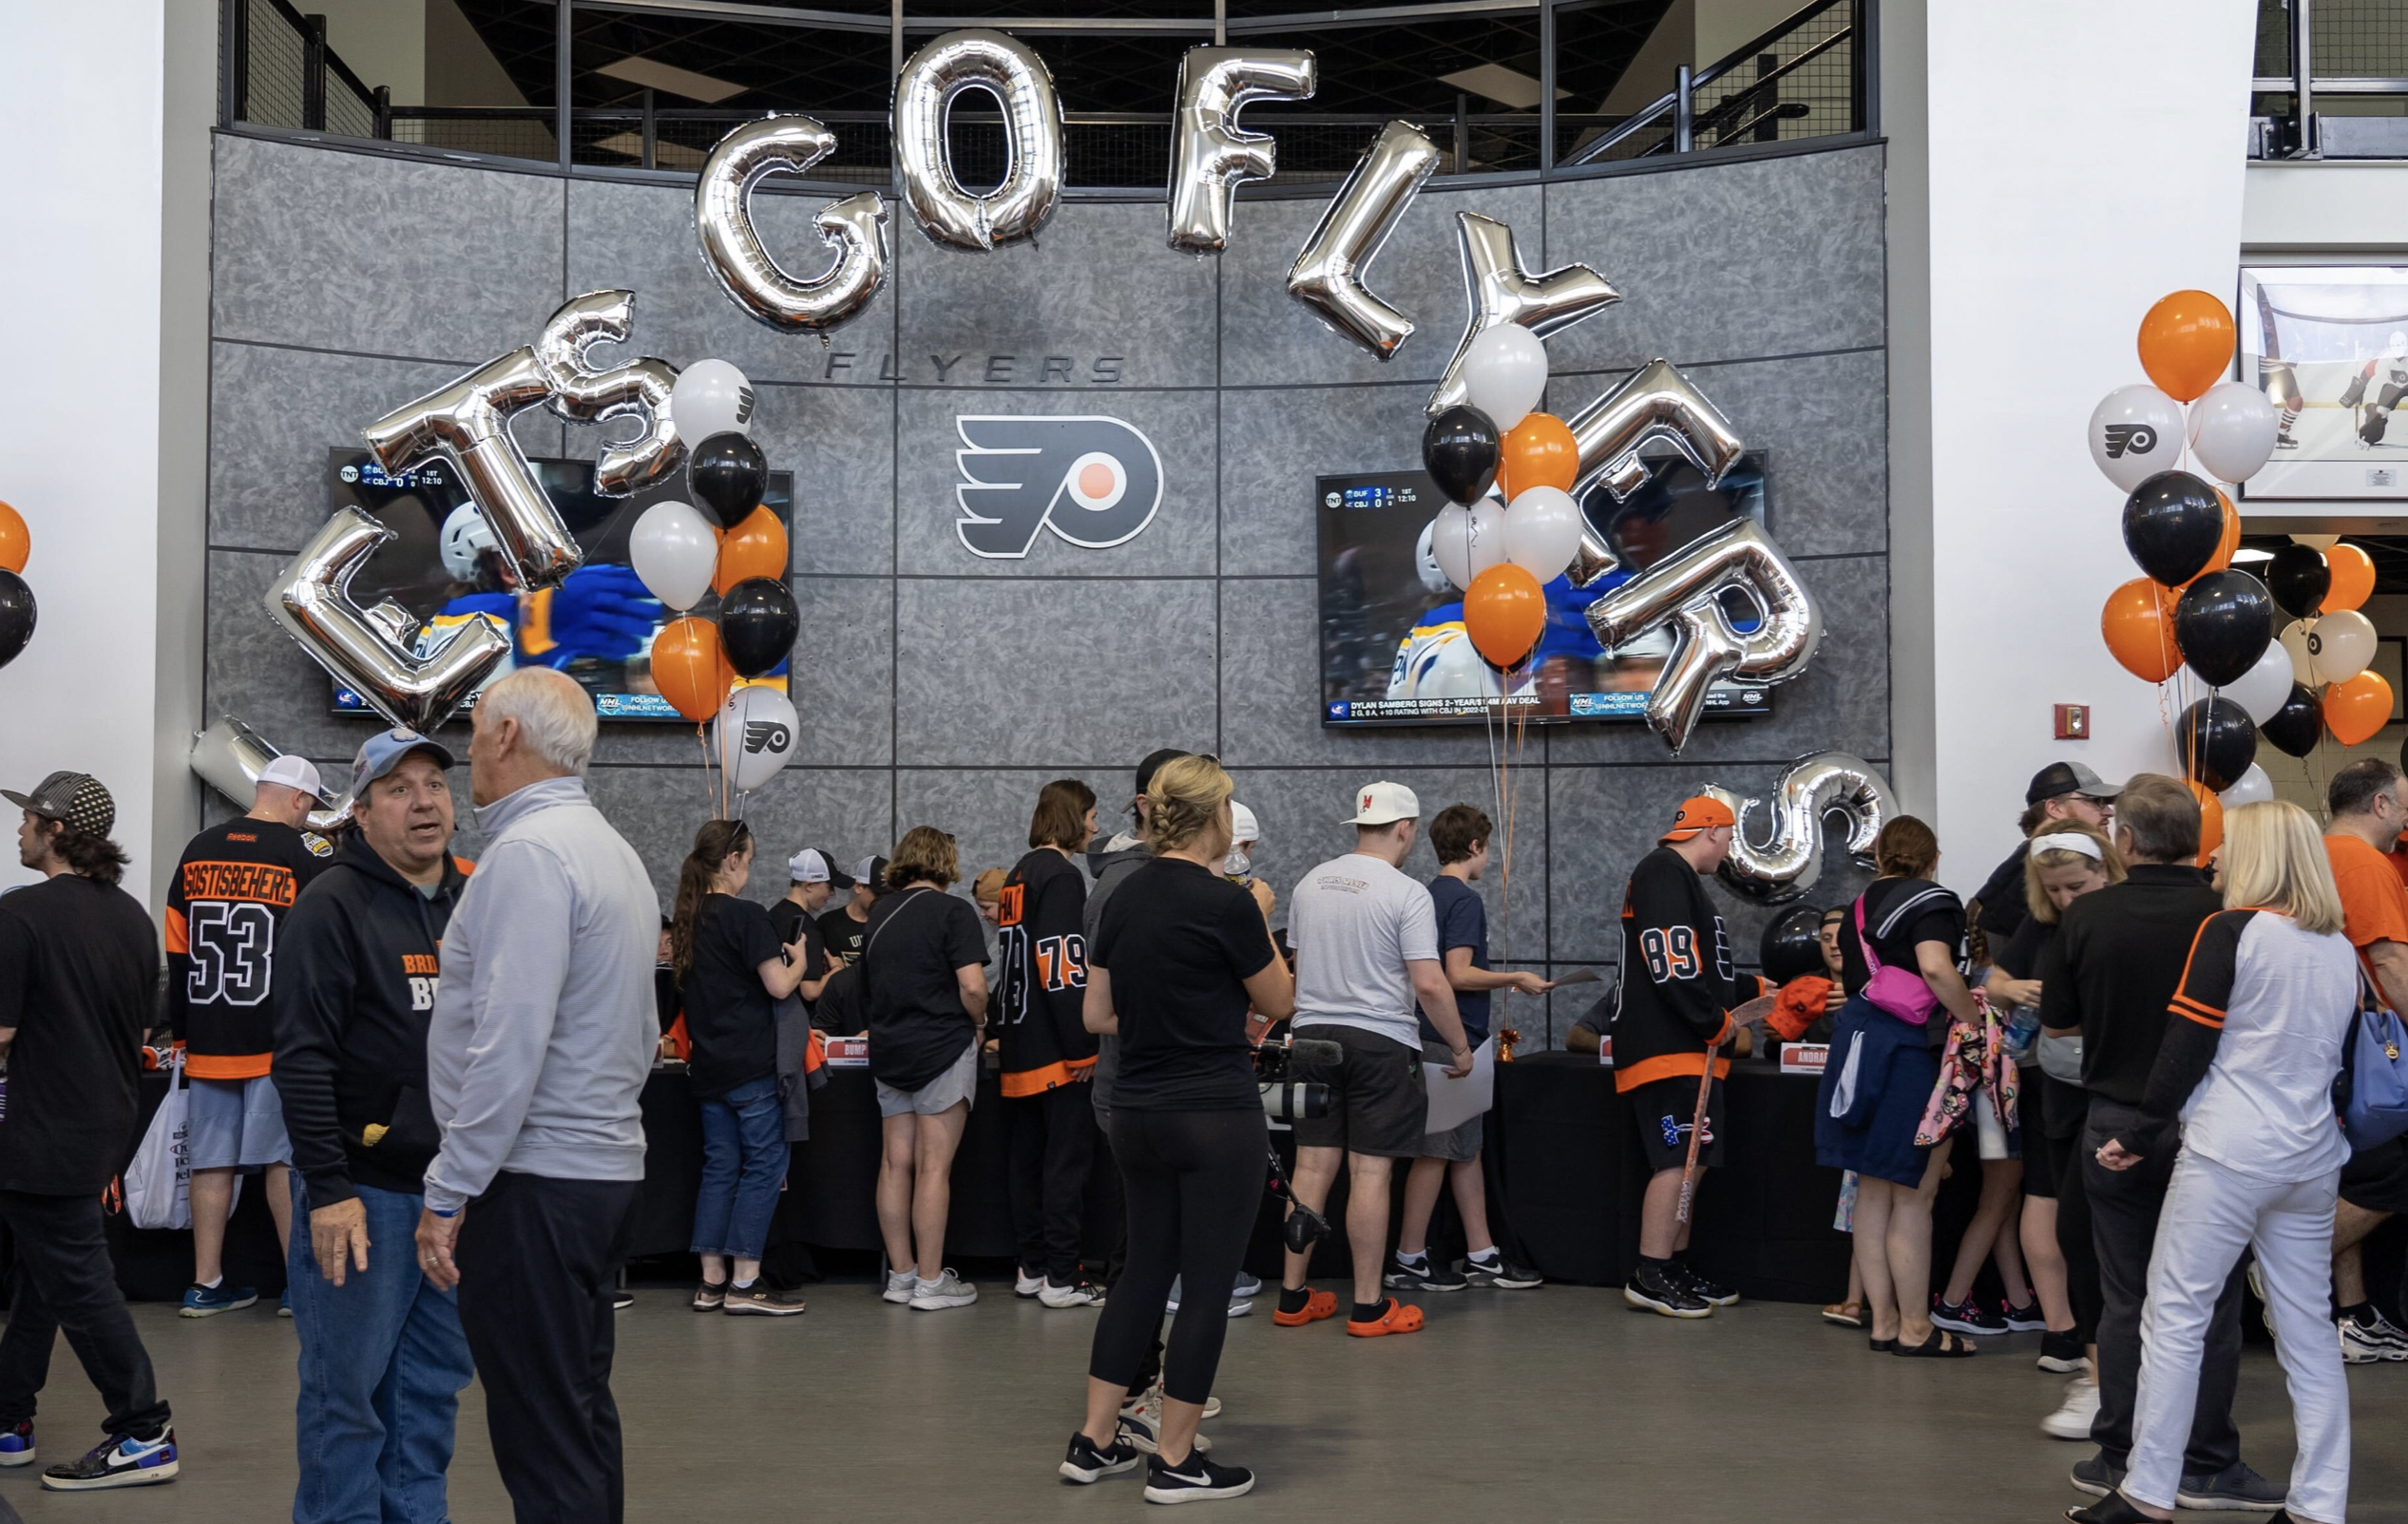 Fans at Flyers' Development Camp in Voorhees.